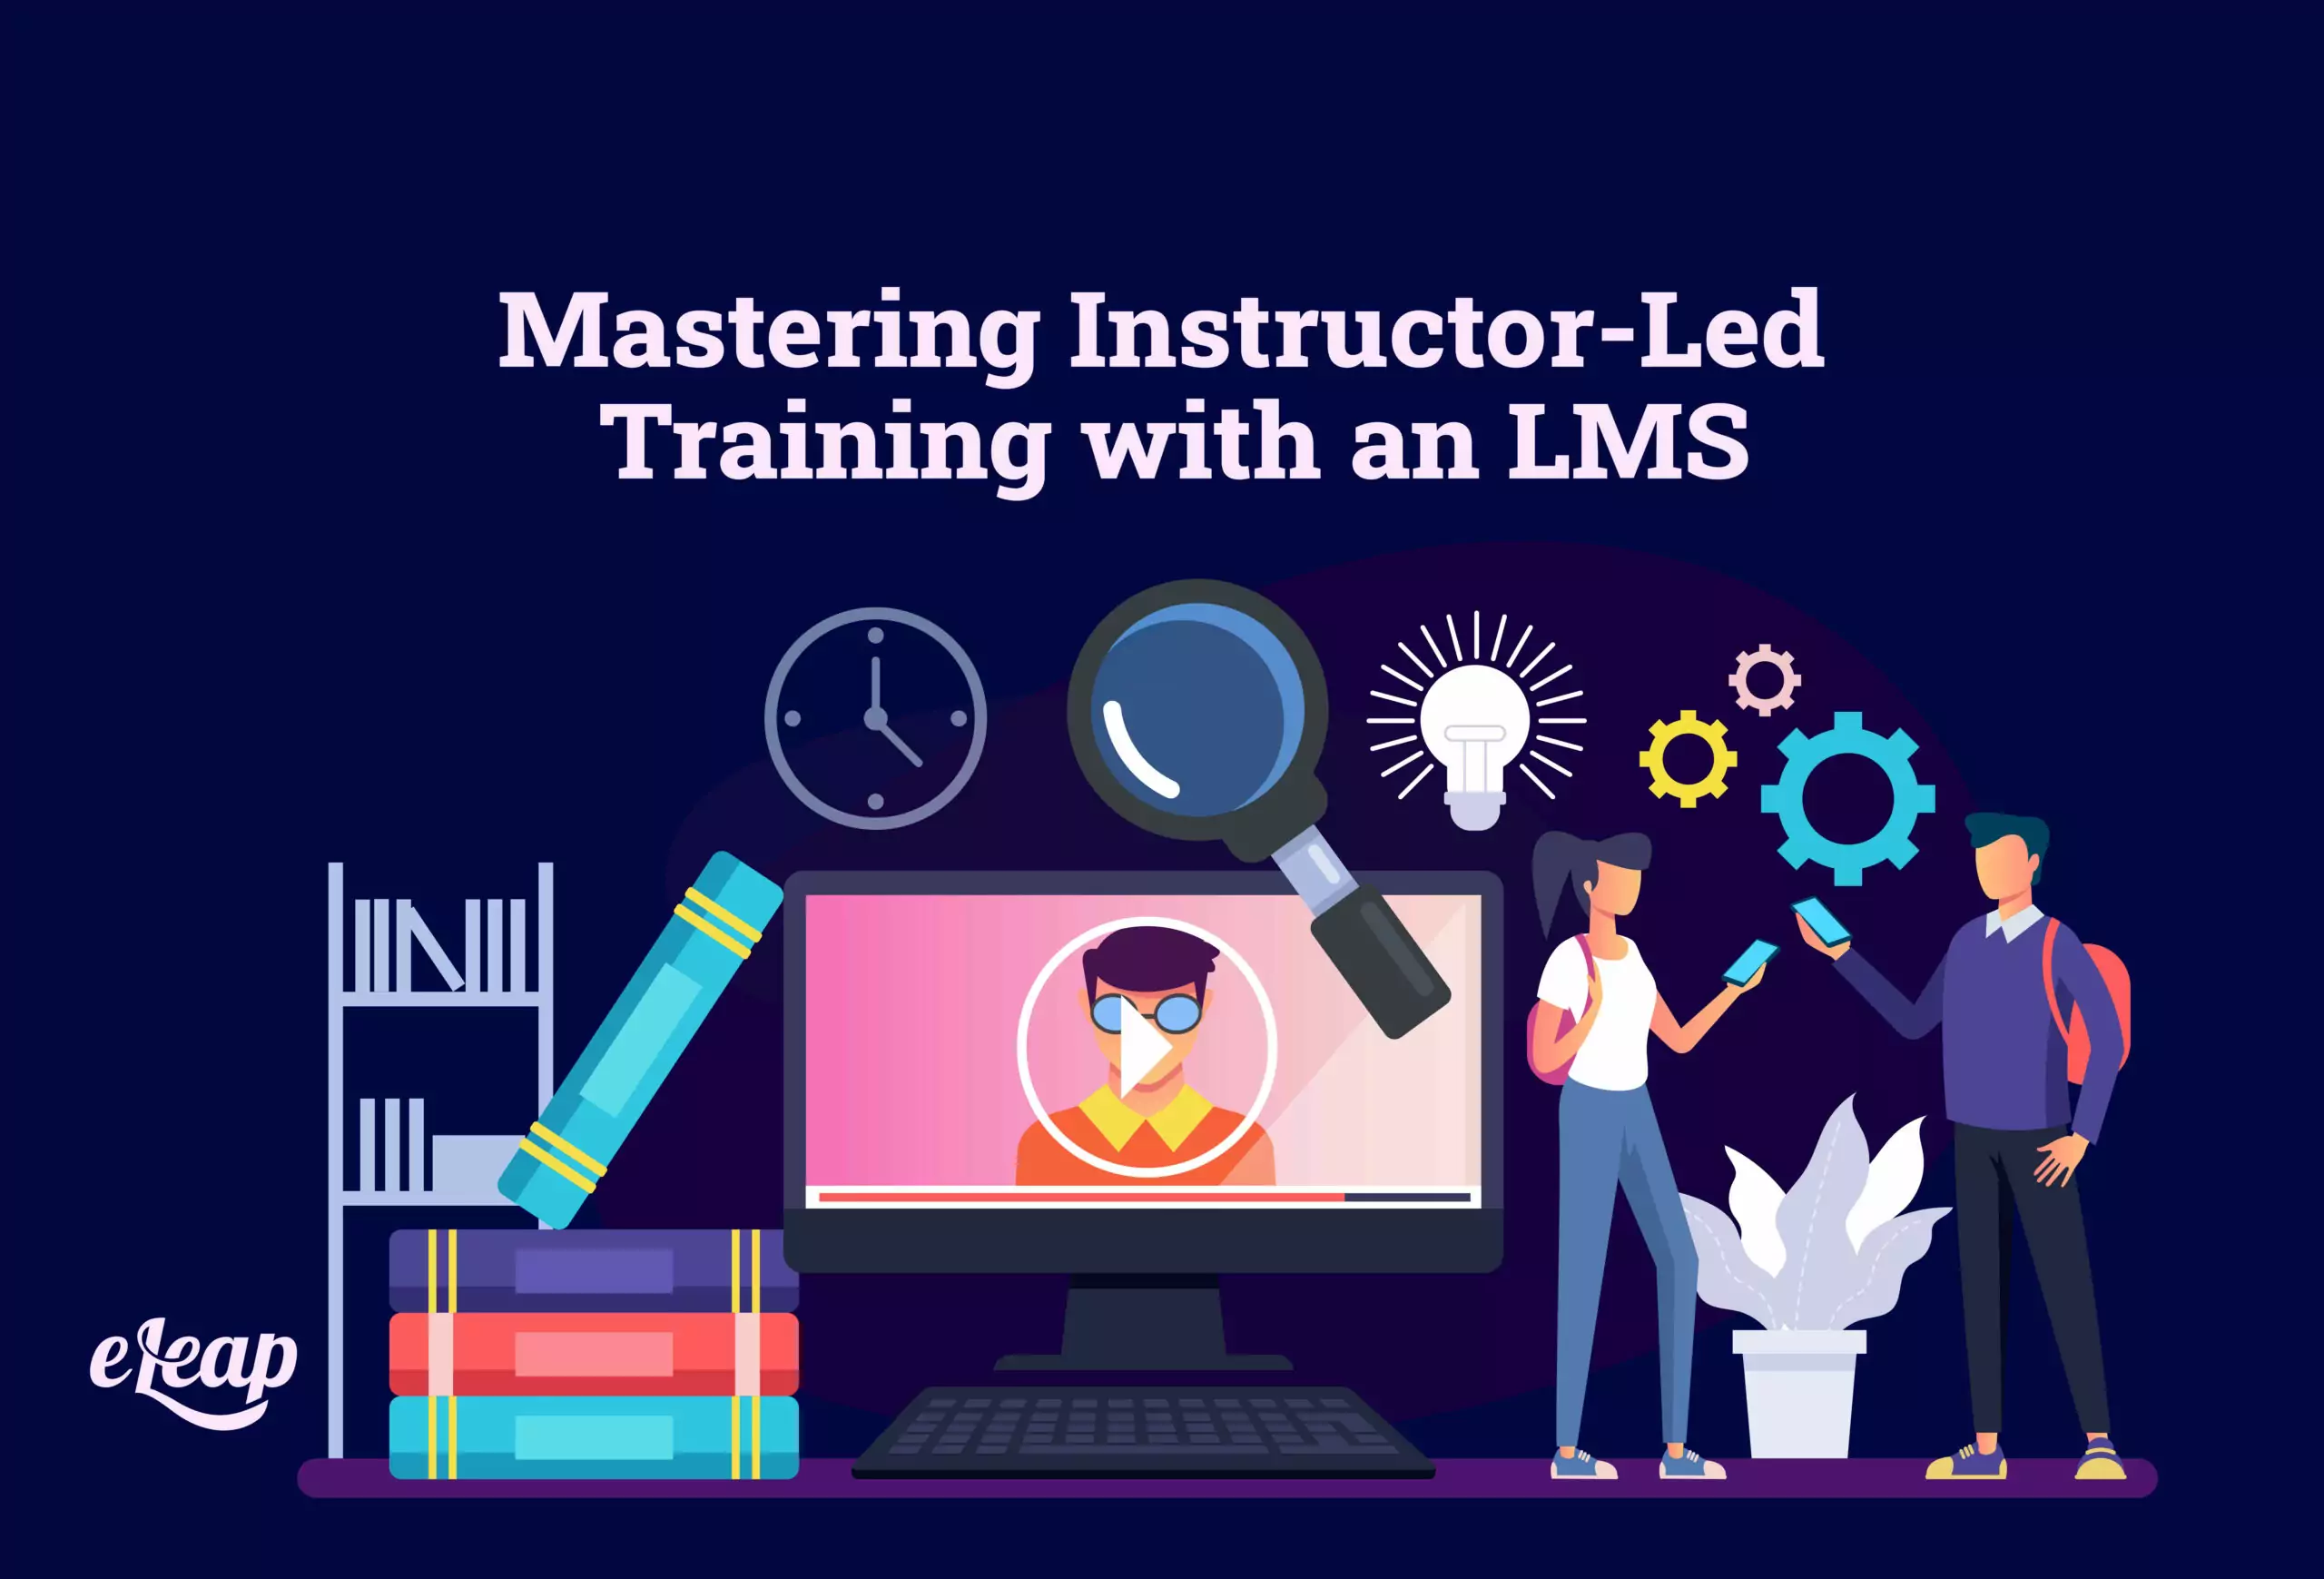 Mastering Instructor-Led Training with an LMS